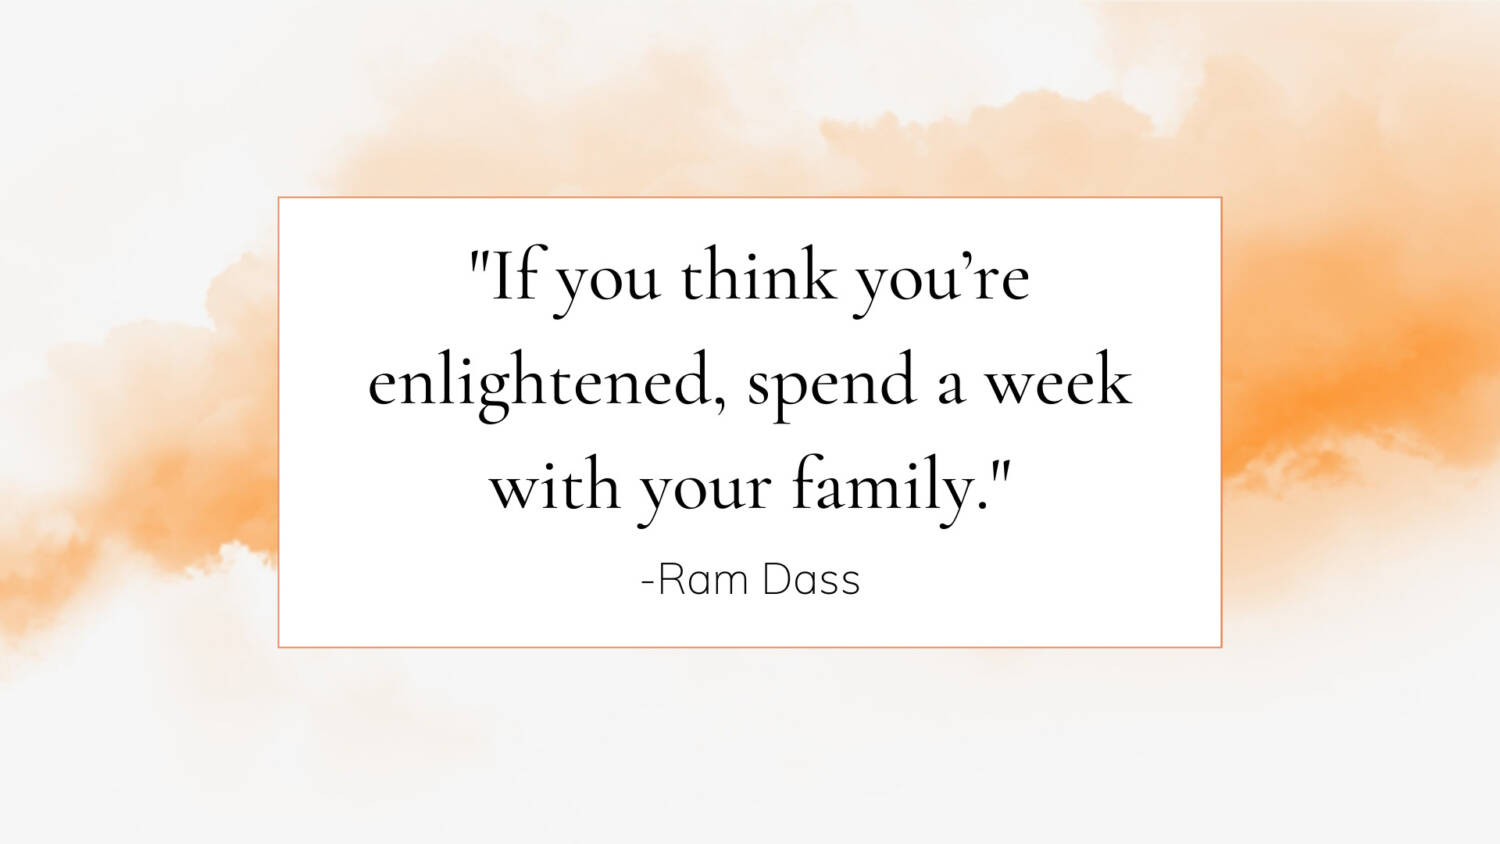 "If you think you’re enlightened, spend a week with your family."